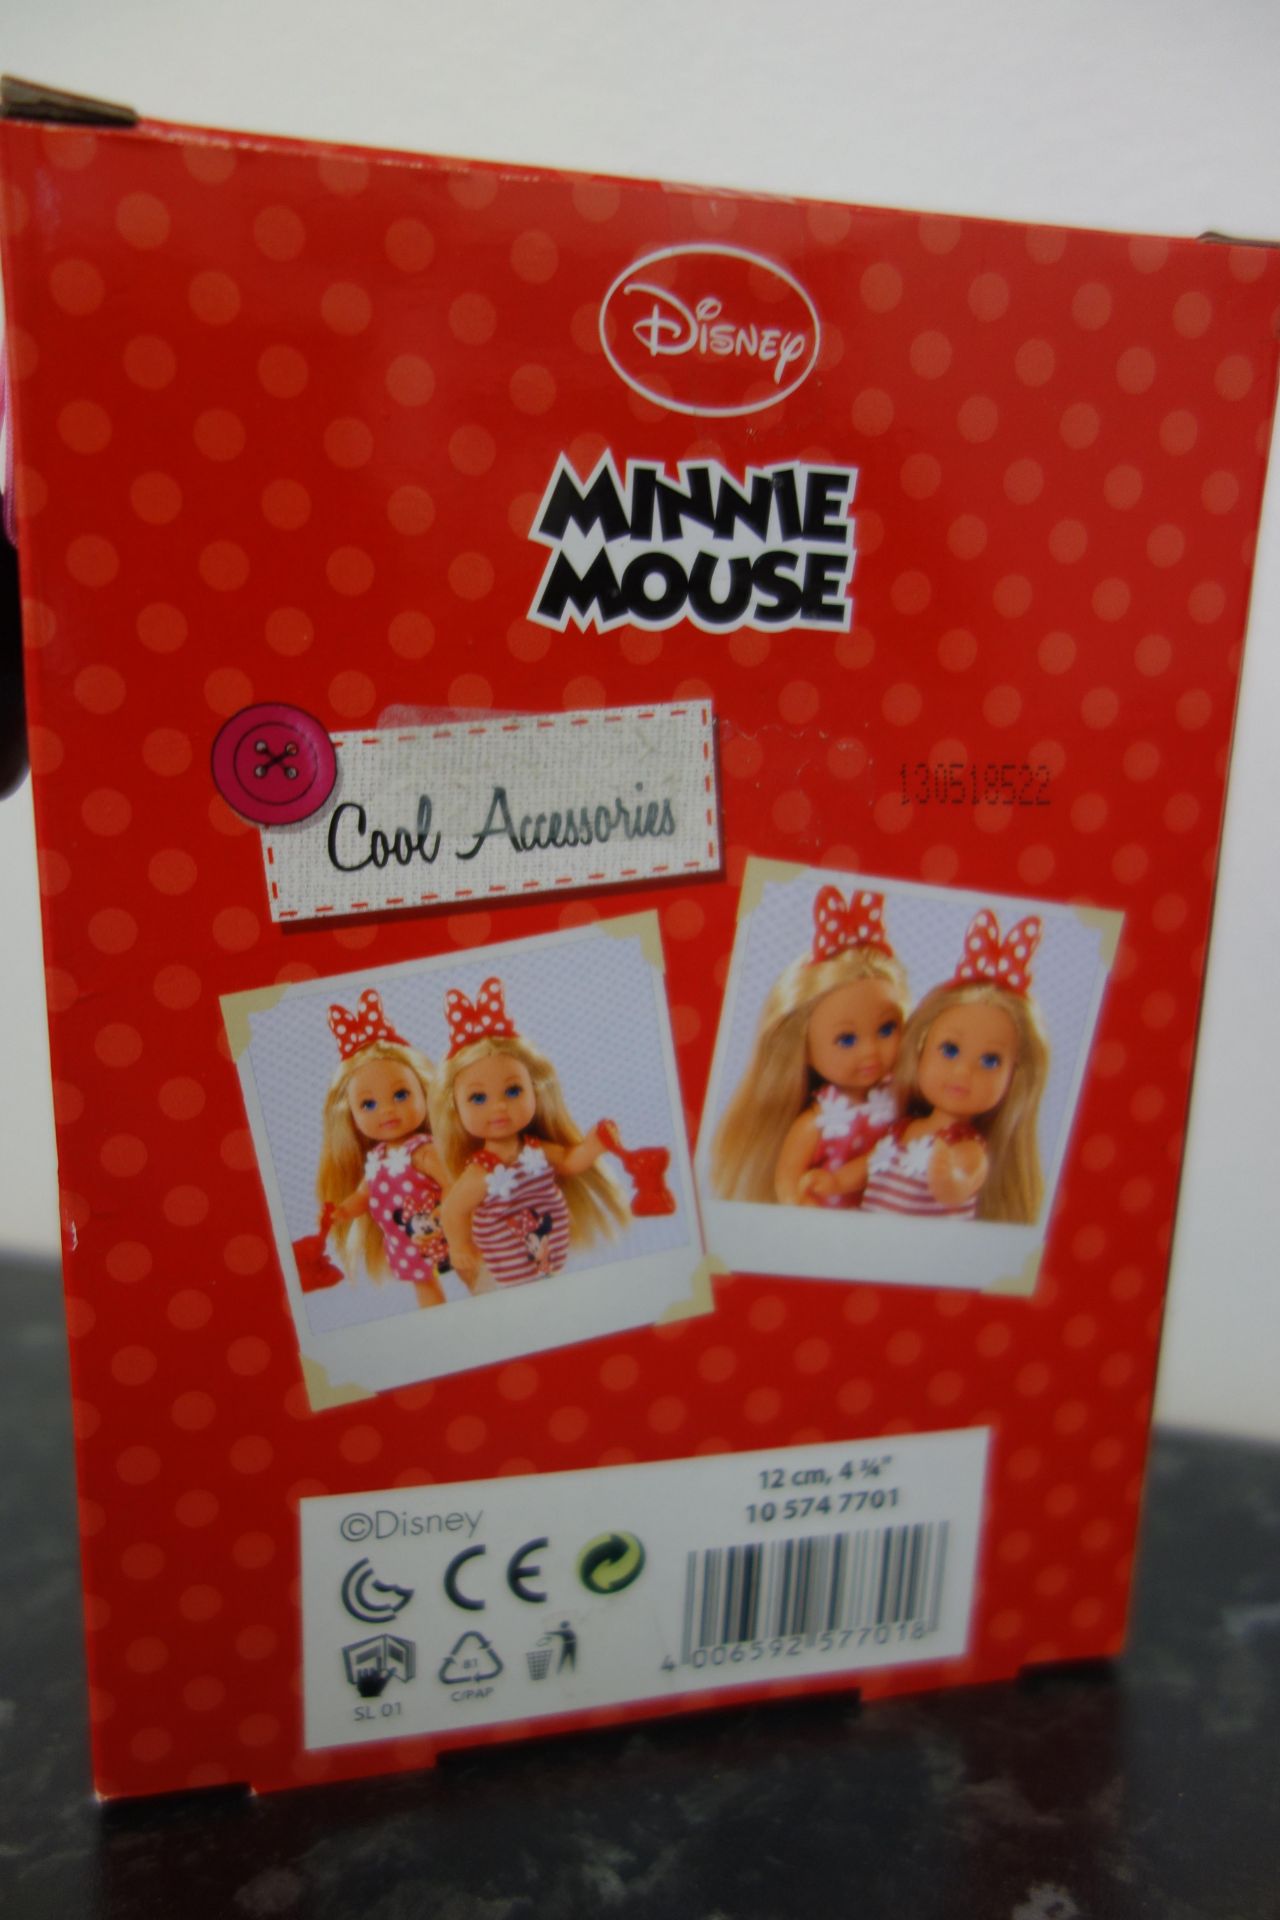 48 x Brand New - Disney Minnie Mouse Cool Accessories Doll & Bracelet Set - Image 2 of 2